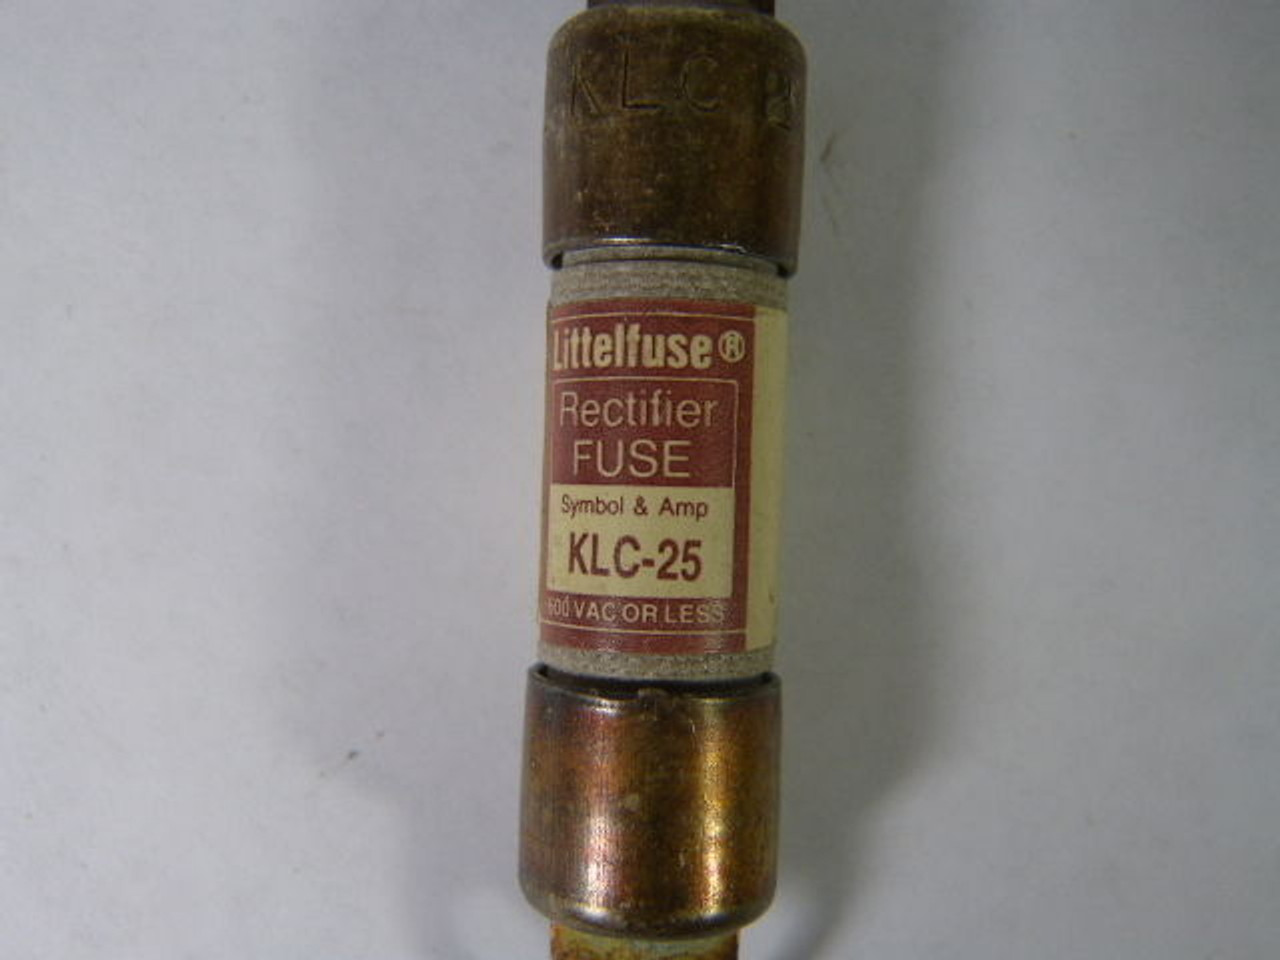 Littelfuse KLC-25 Rectifier Fuse 25A 600V USED